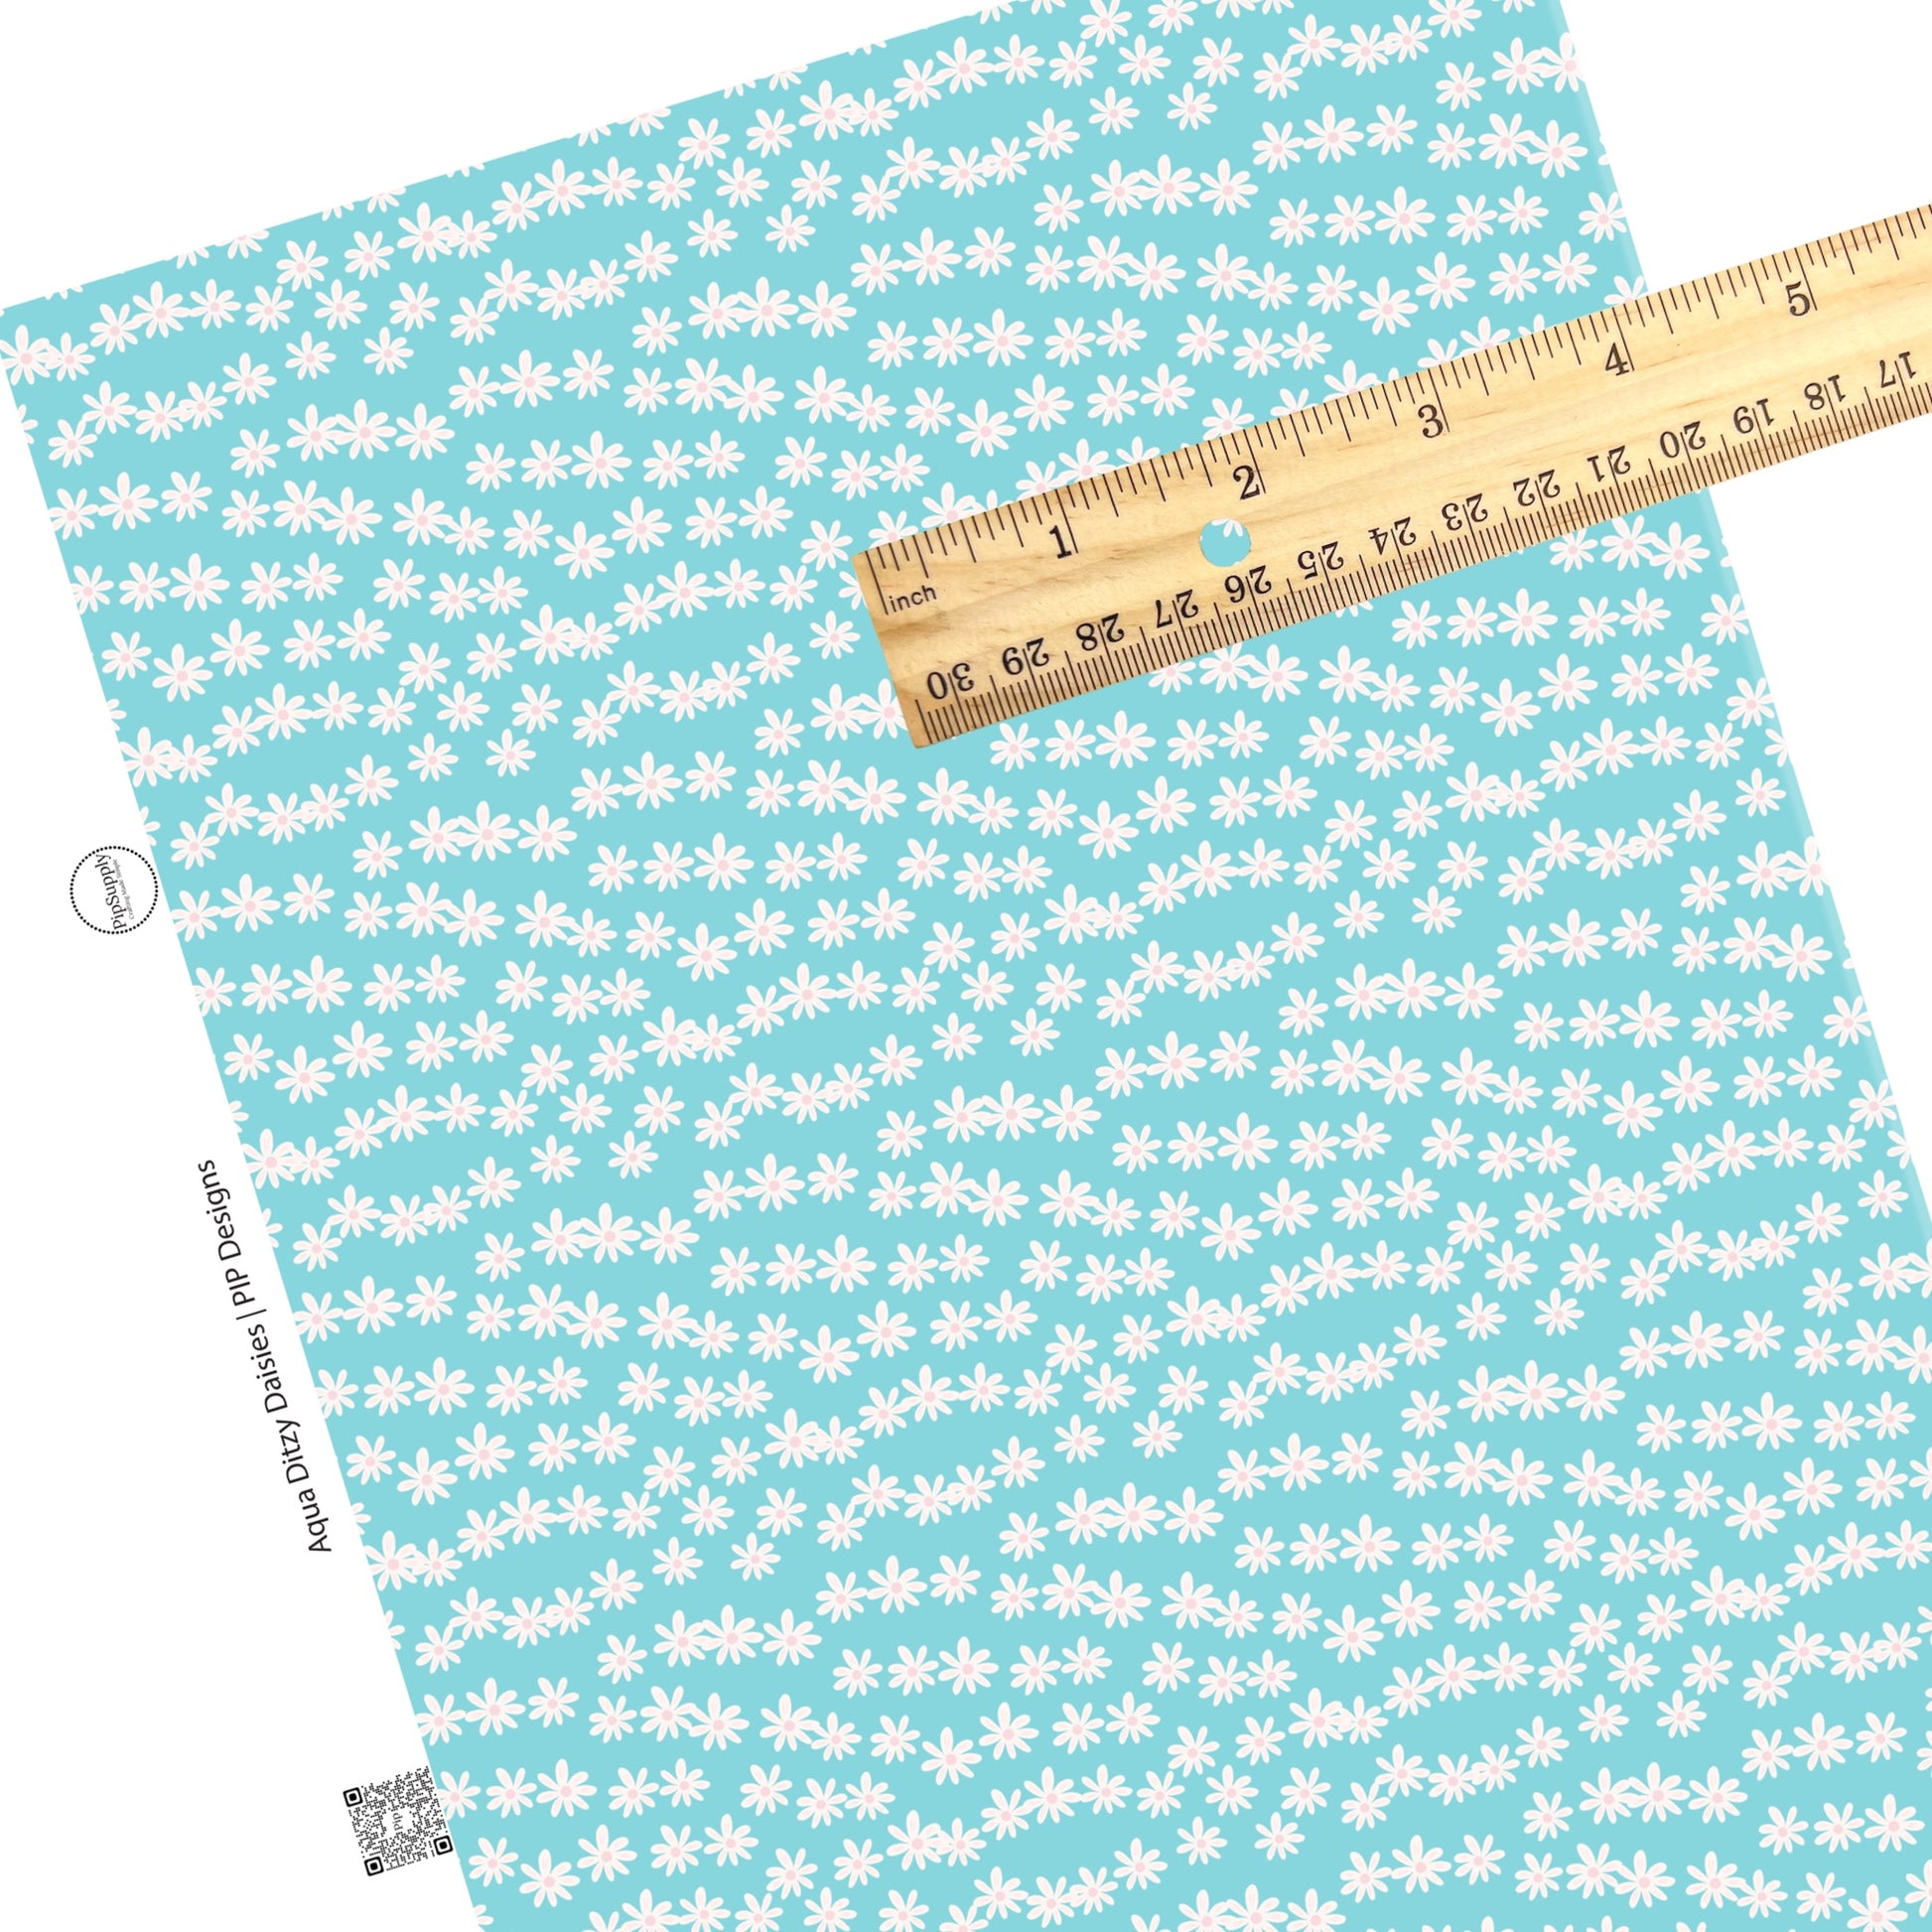 These spring daisies pattern themed faux leather sheets contain the following design elements: tiny white daisies on aqua. Our CPSIA compliant faux leather sheets or rolls can be used for all types of crafting projects. The designer of this pattern is Hay Sis Hay. 